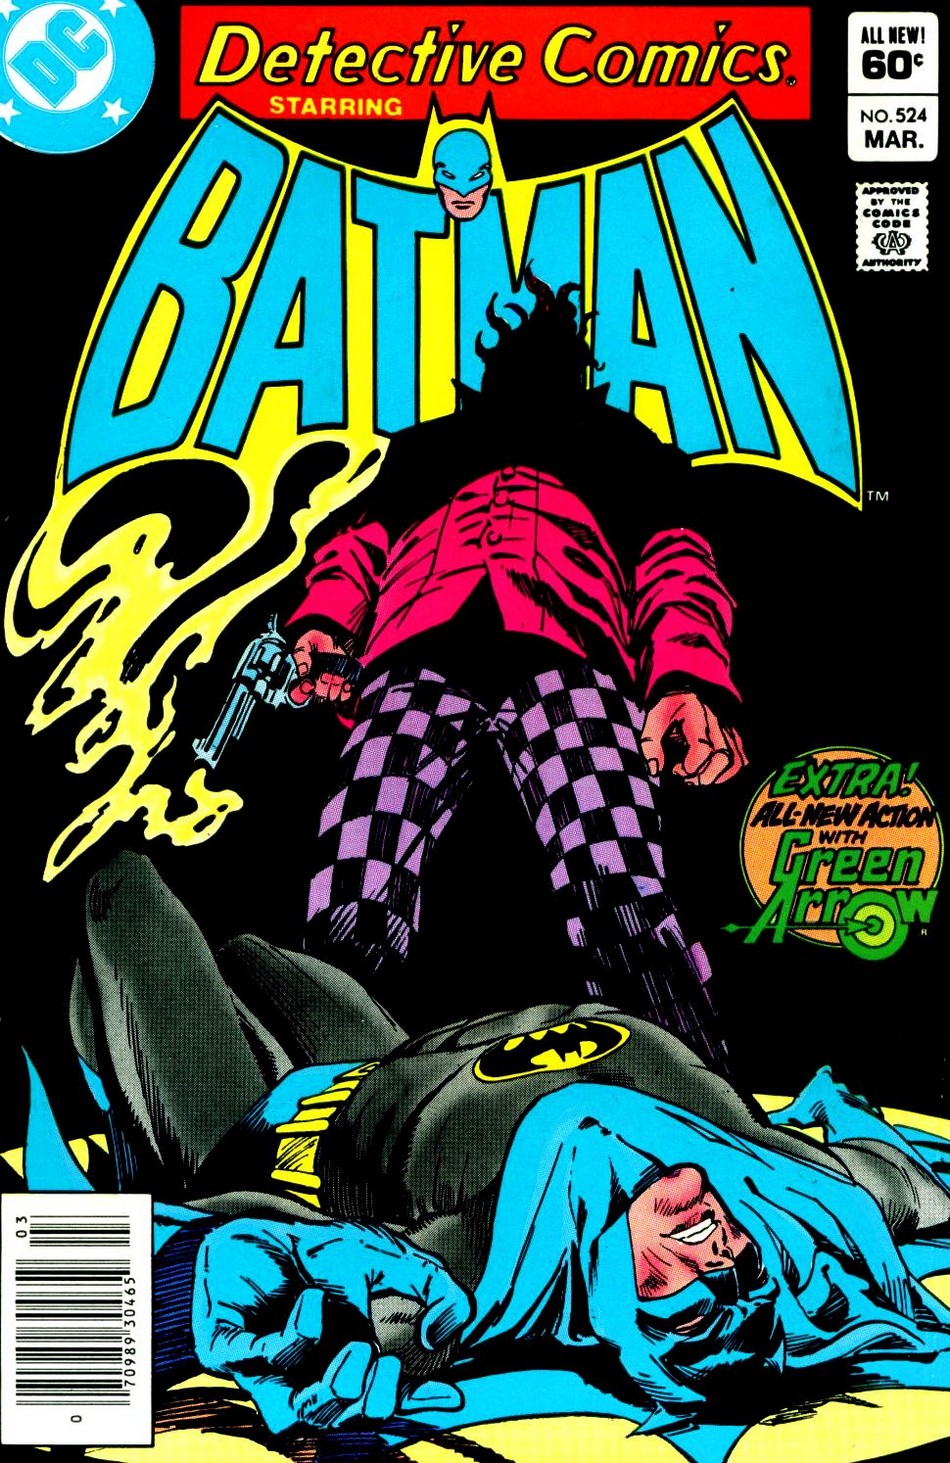 Read Up on Batman @ The Thought Balloon: Detective Comics 524  1983